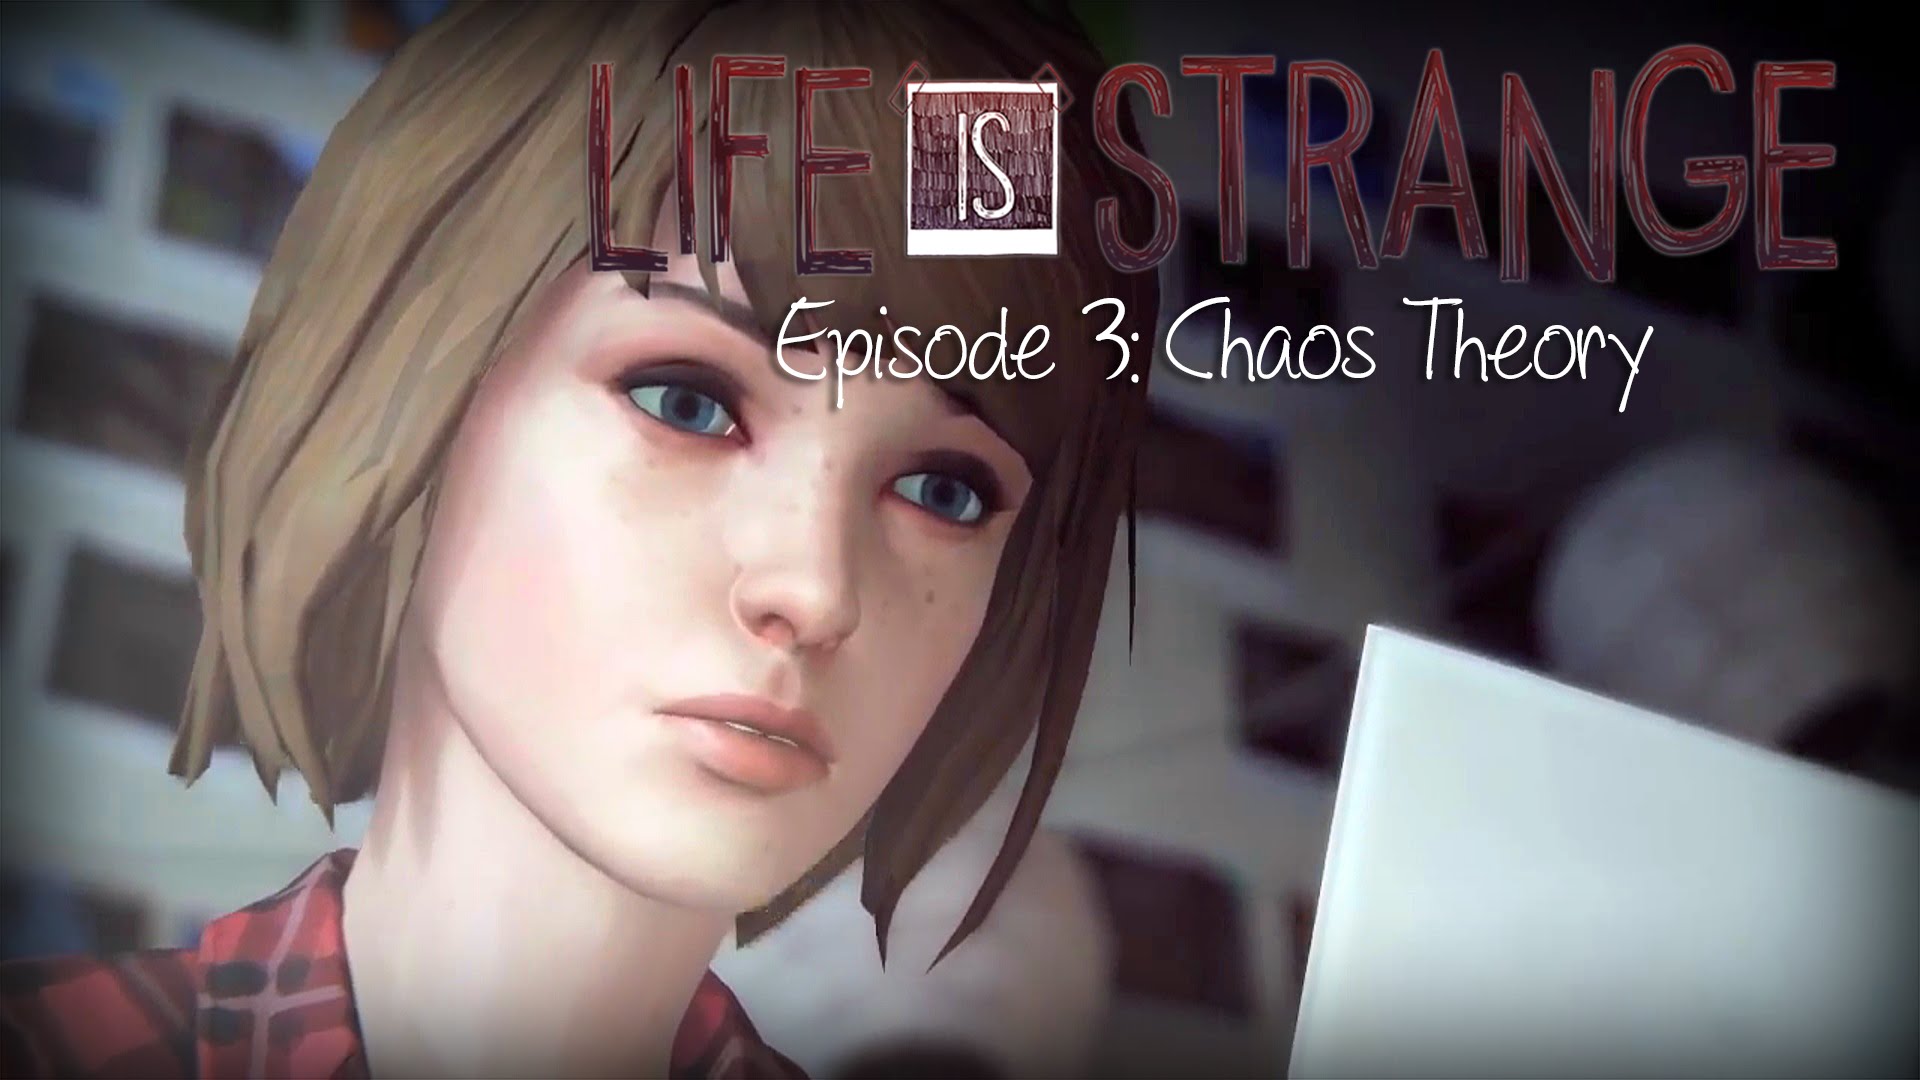 Life is digital. Life is Strange эпизоды. Life is Strange 3. Life is Strange эпизод 4 Проявочная. Life is Strange: Episode 3 - Chaos Theory.